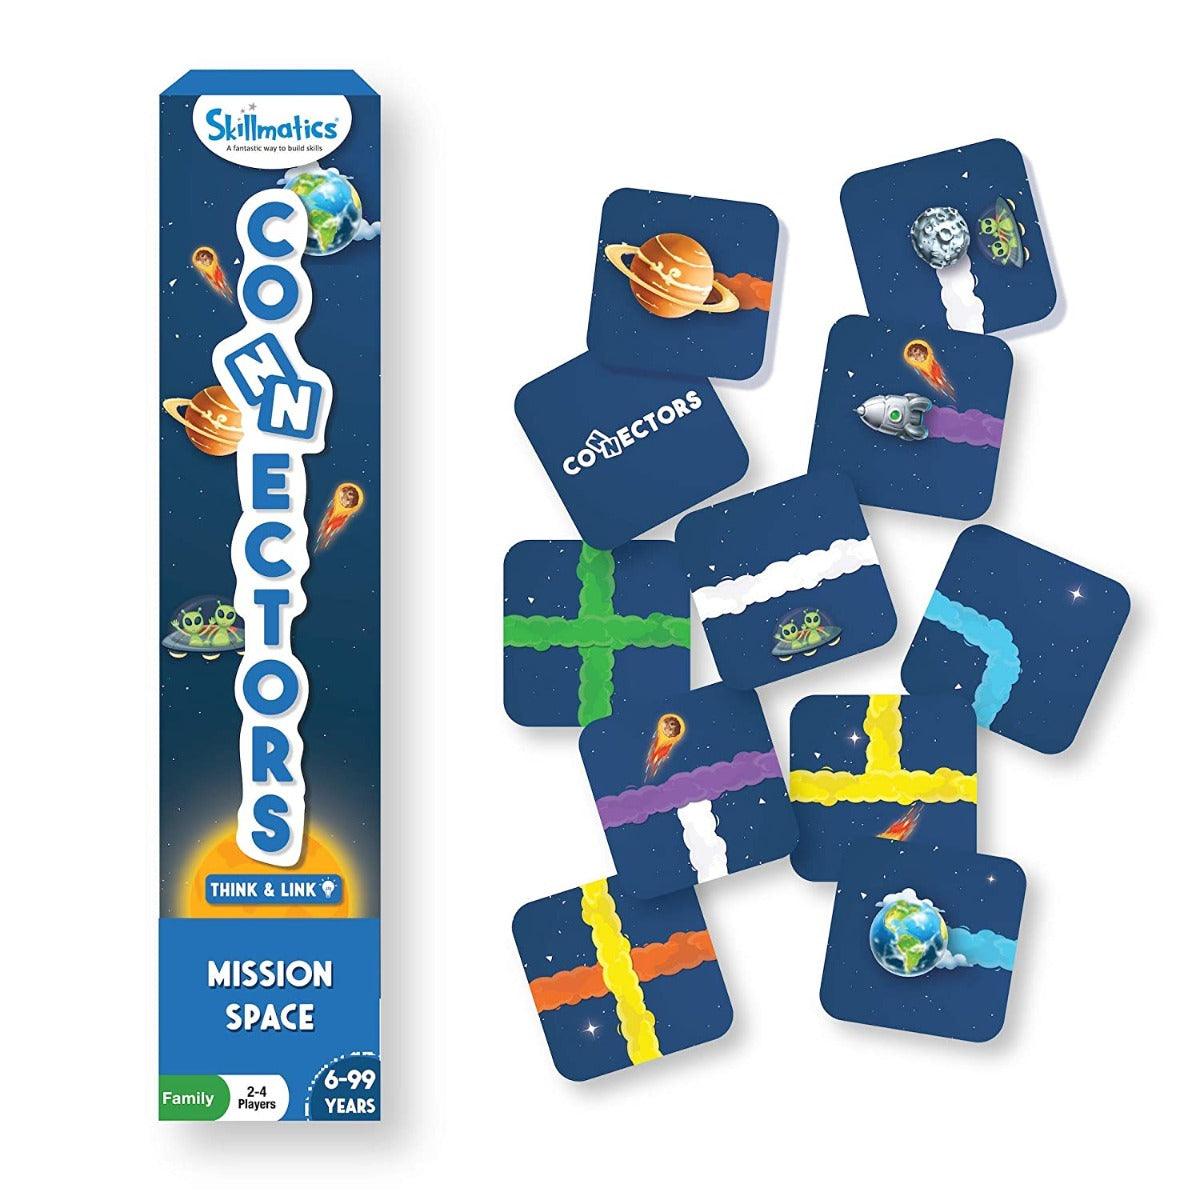 Skillmatics Connectors Educational Game: Mission Space | Fun & Fast Family Game of Smart Connections | Gifts for Boys and Girls Ages 6-99